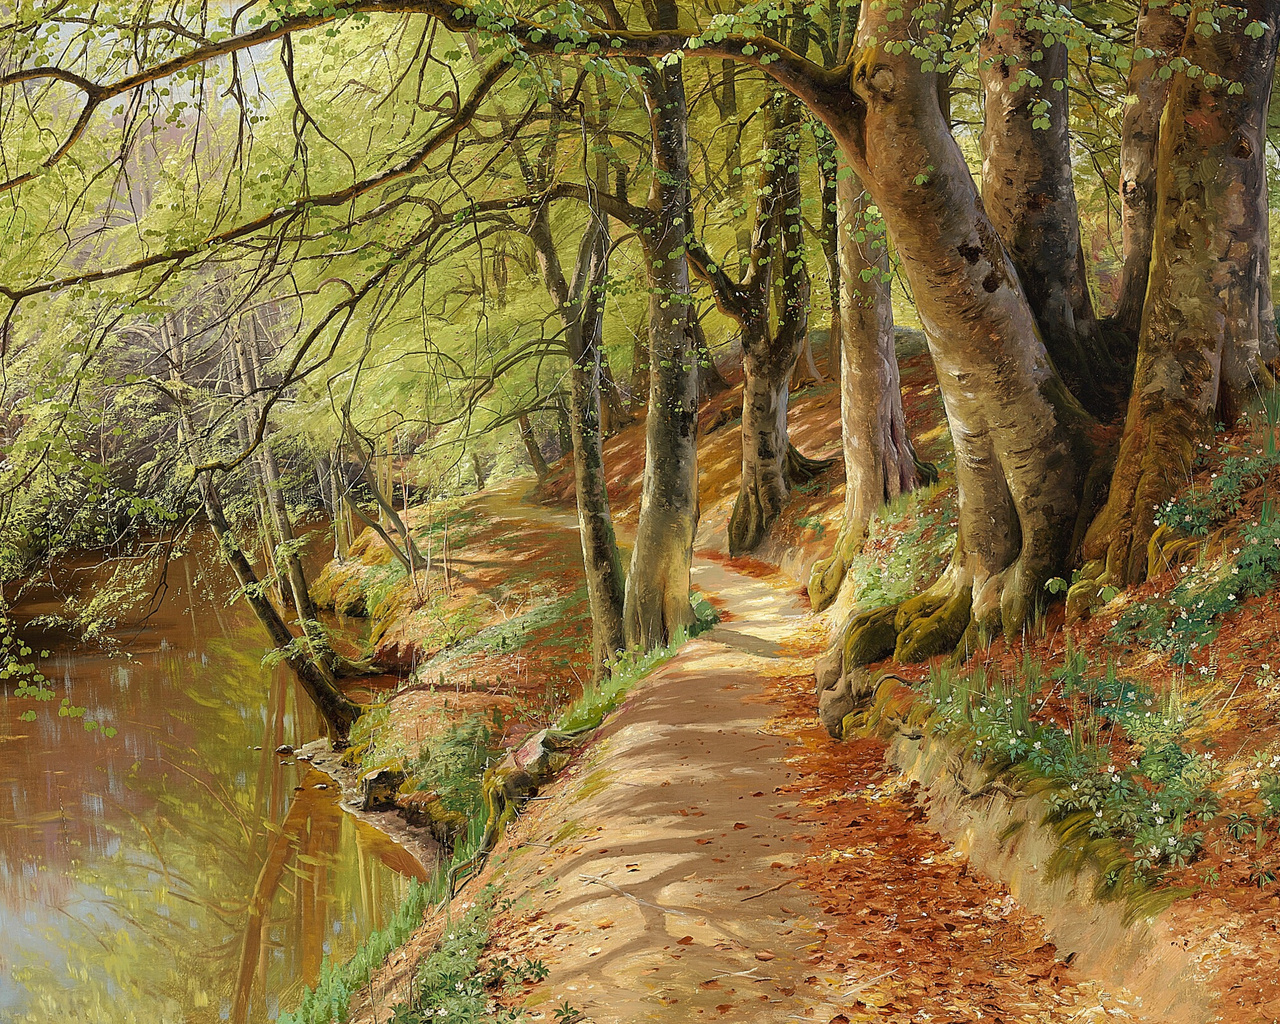 peder mork monsted, danish, 1895, a spring day in the woods with fresh-blown beeches and anemones in the forest bed